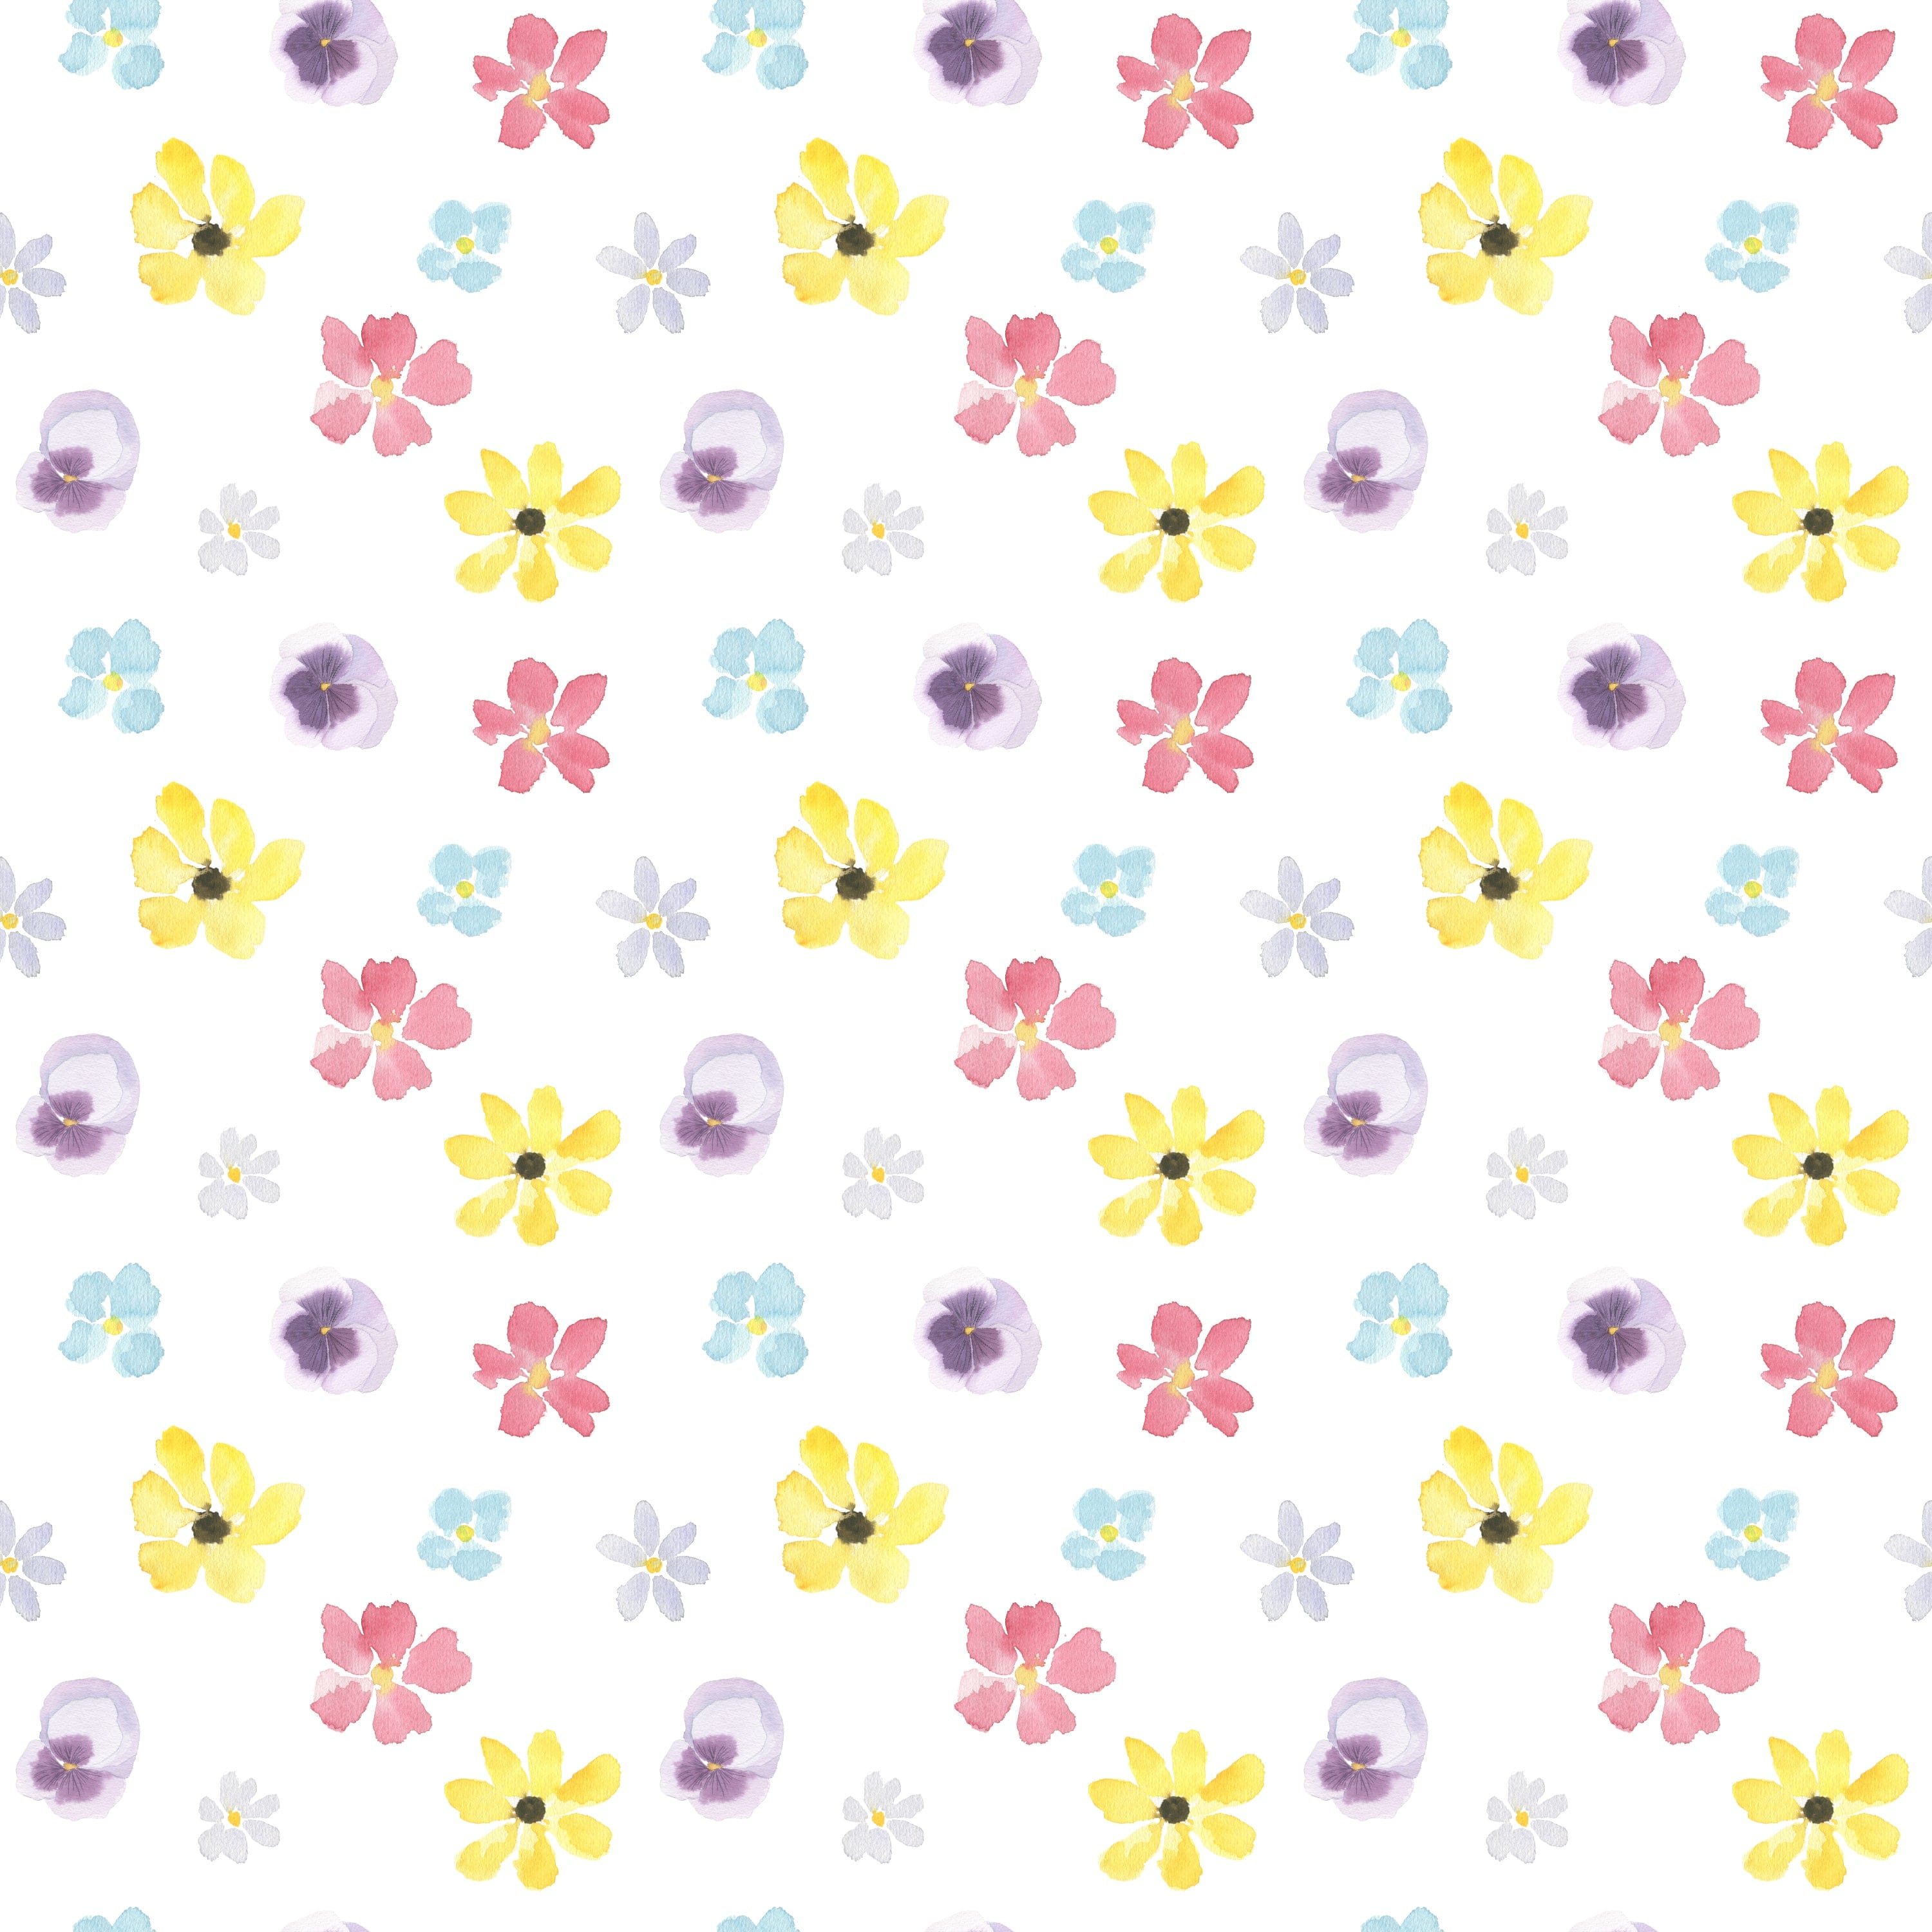 Pattern detail of the Spring Field Wallpaper - VI, showcasing a vibrant design with a mix of watercolor-style flowers in various colors, including yellow, pink, purple, and blue, on a white background